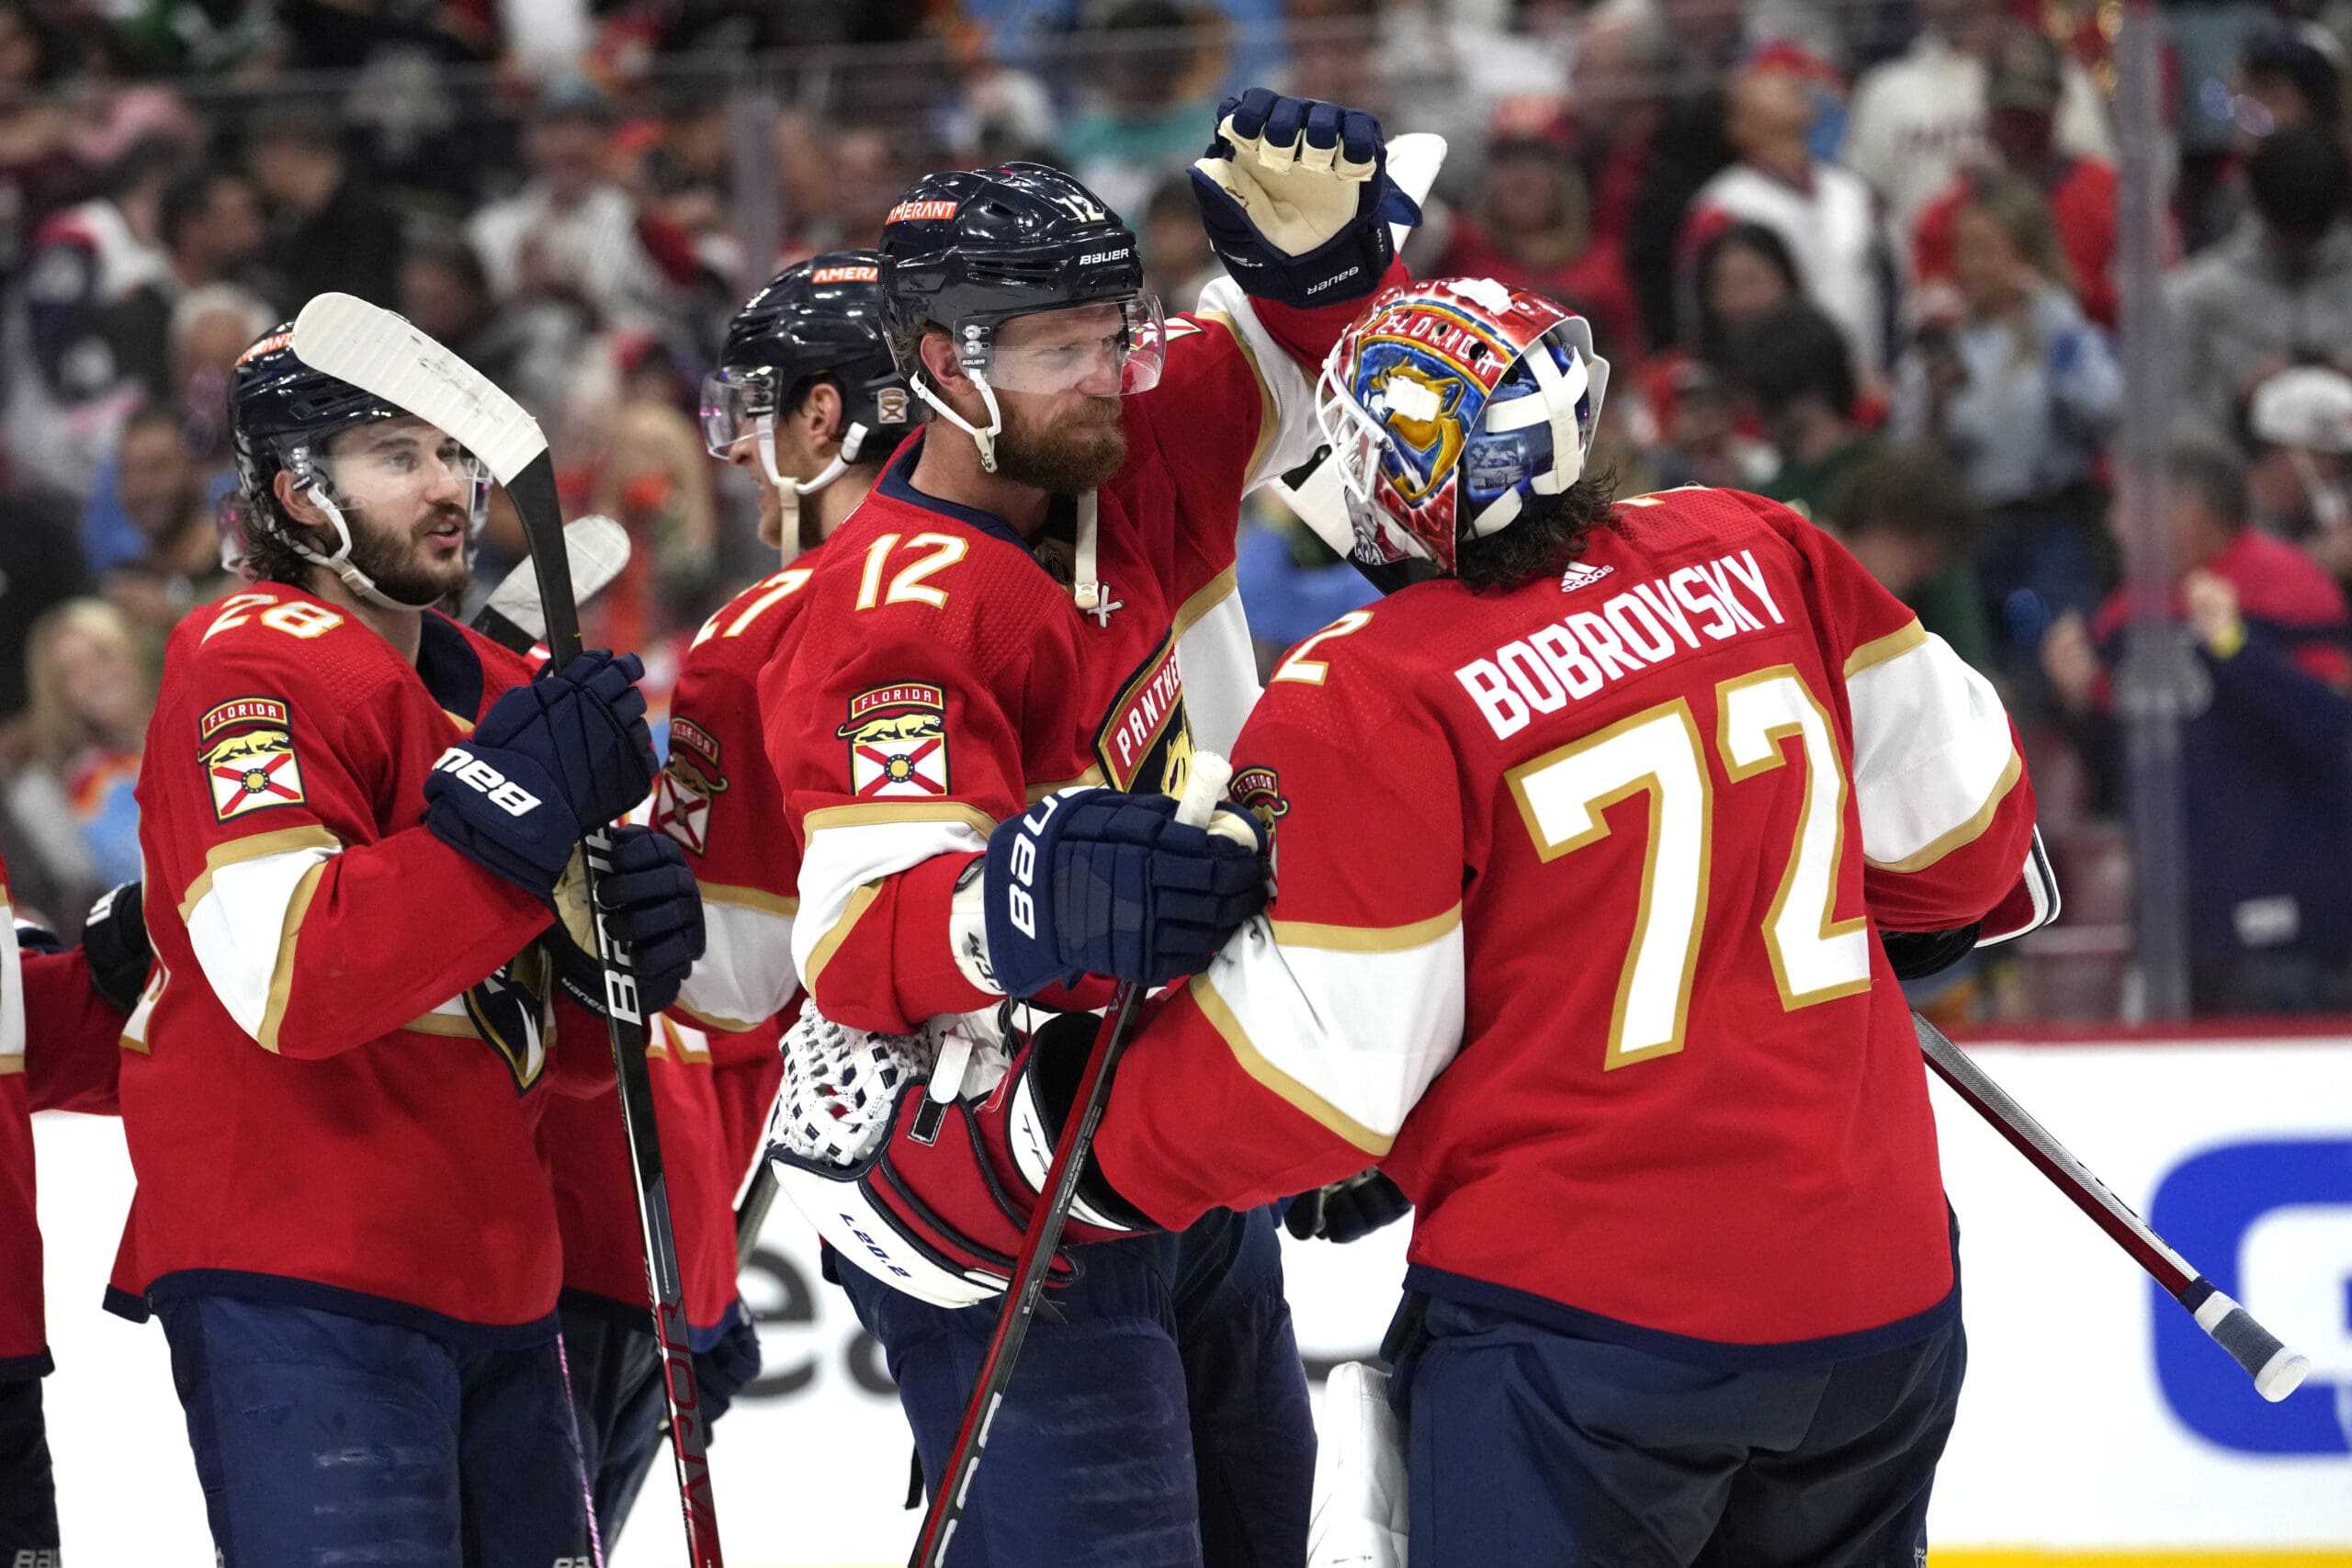 Panthers happy with win in New Jersey but know they can still